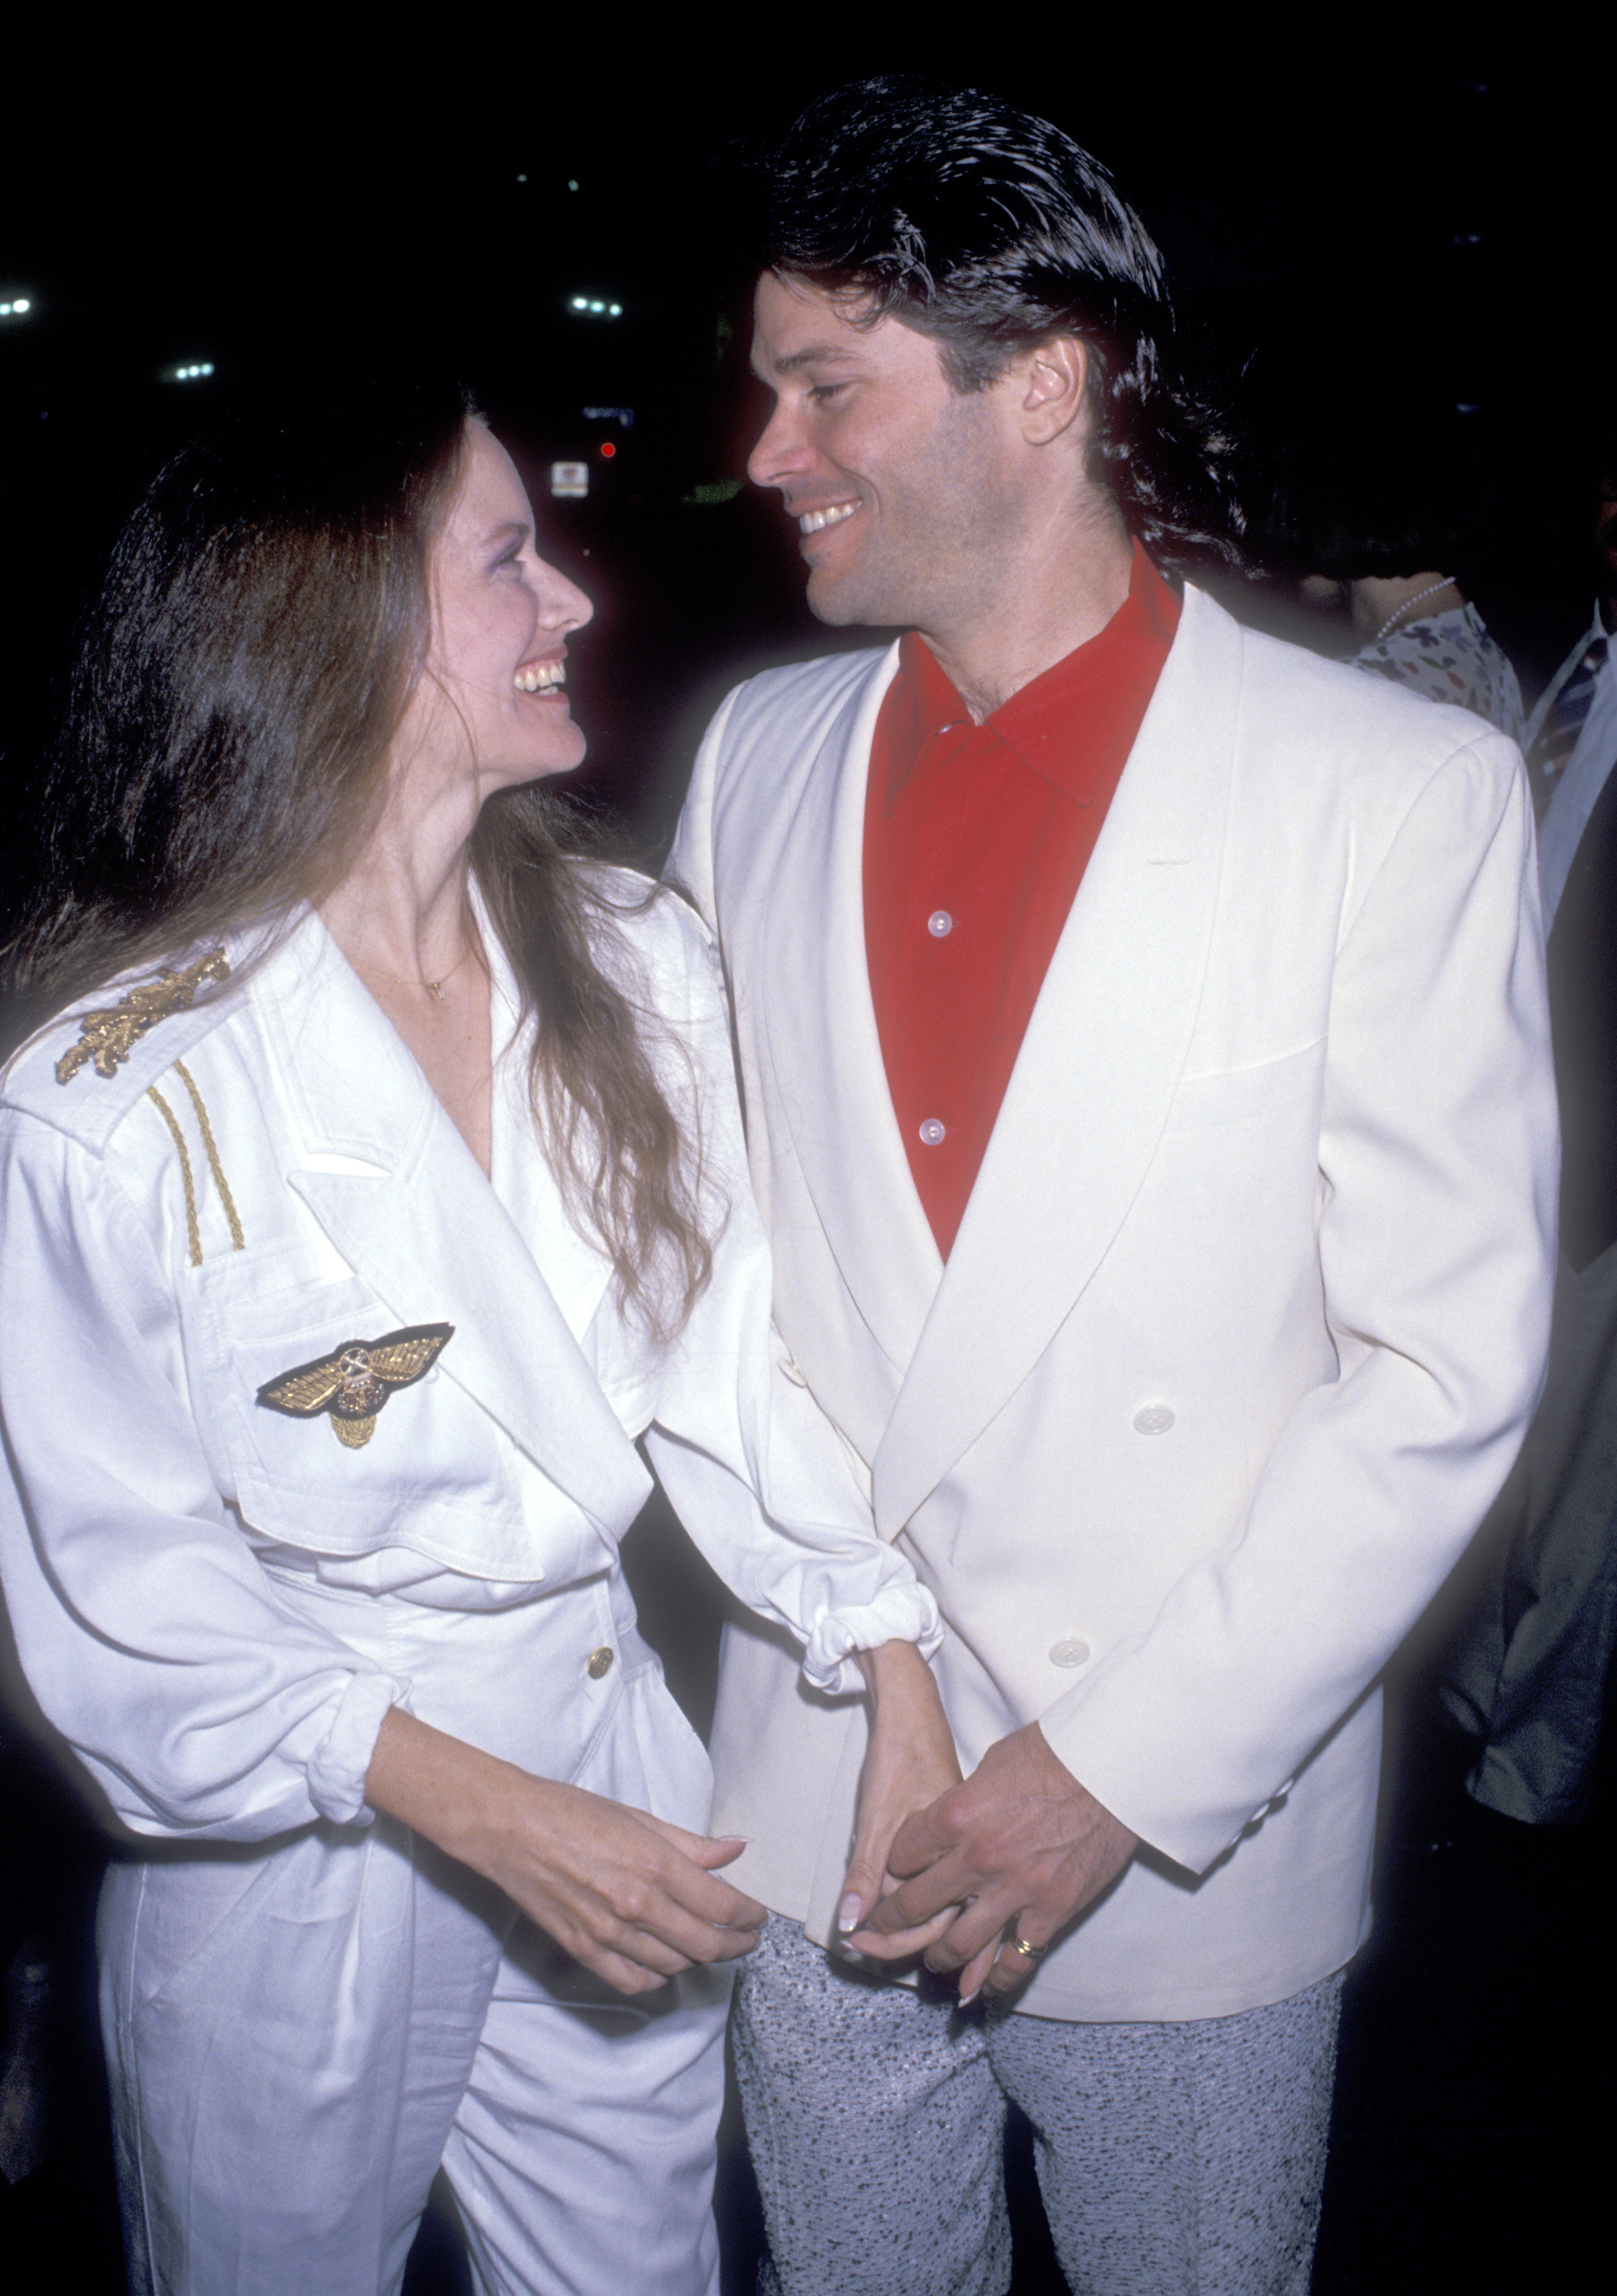 Peter Reckell and wife Dale Kristien attend the Mad, Bad, and Dangerous to Know Opening Night Performance on August 23, 1989 at Ahmanson Theatre, Los Angeles Music Center in Los Angeles, California. | Source: Getty Images